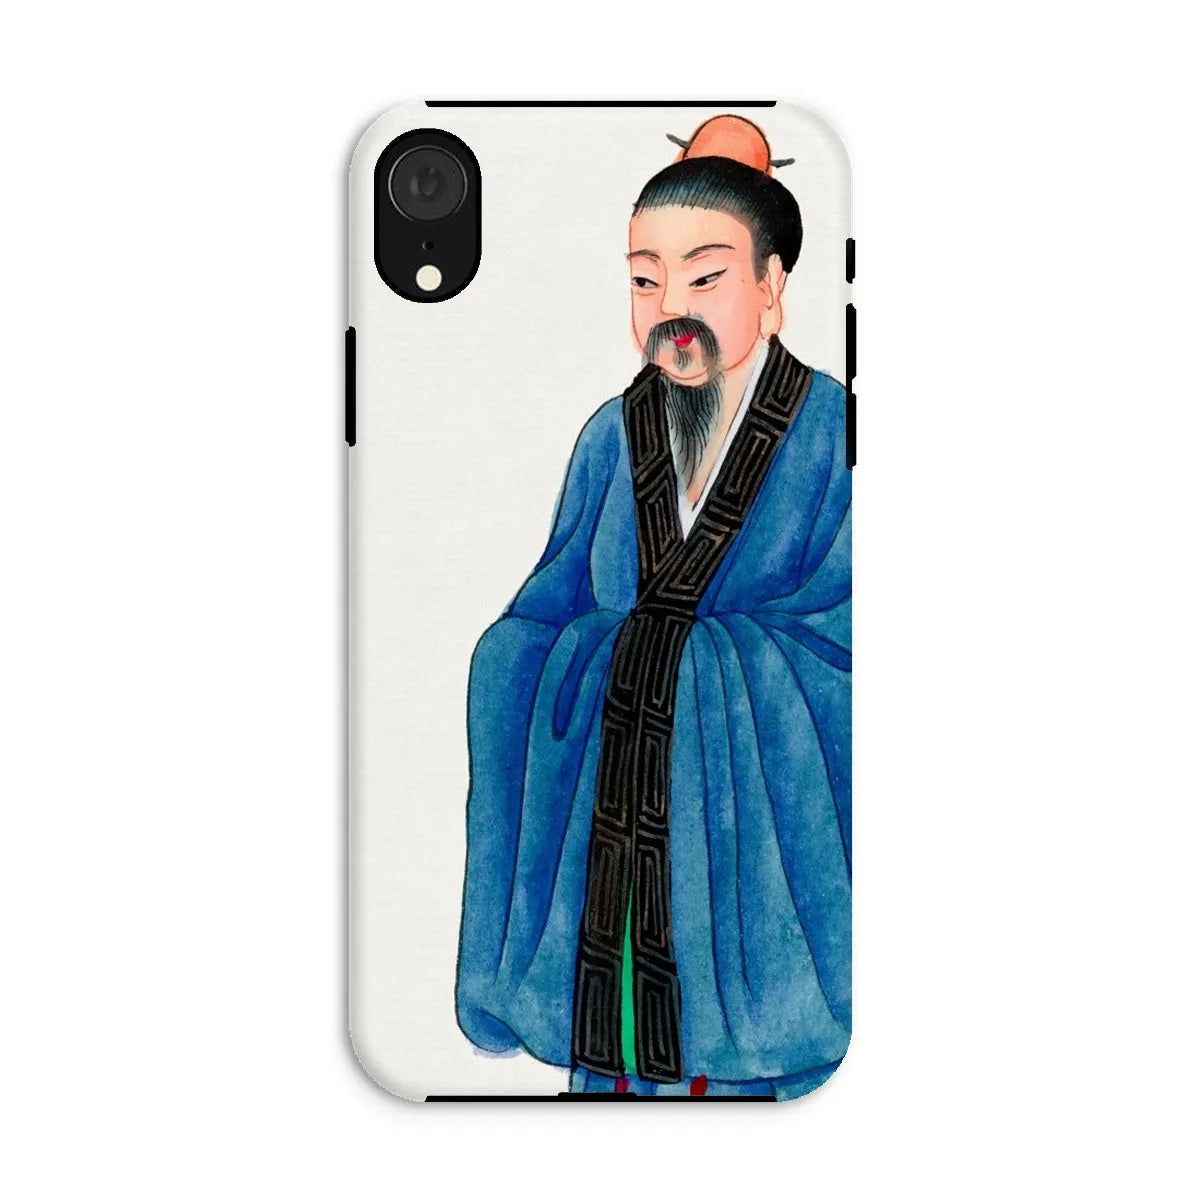 Grand Master - Chinese Buddhist Aesthetic Art Phone Case - Iphone Xr / Matte - Mobile Phone Cases - Aesthetic Art